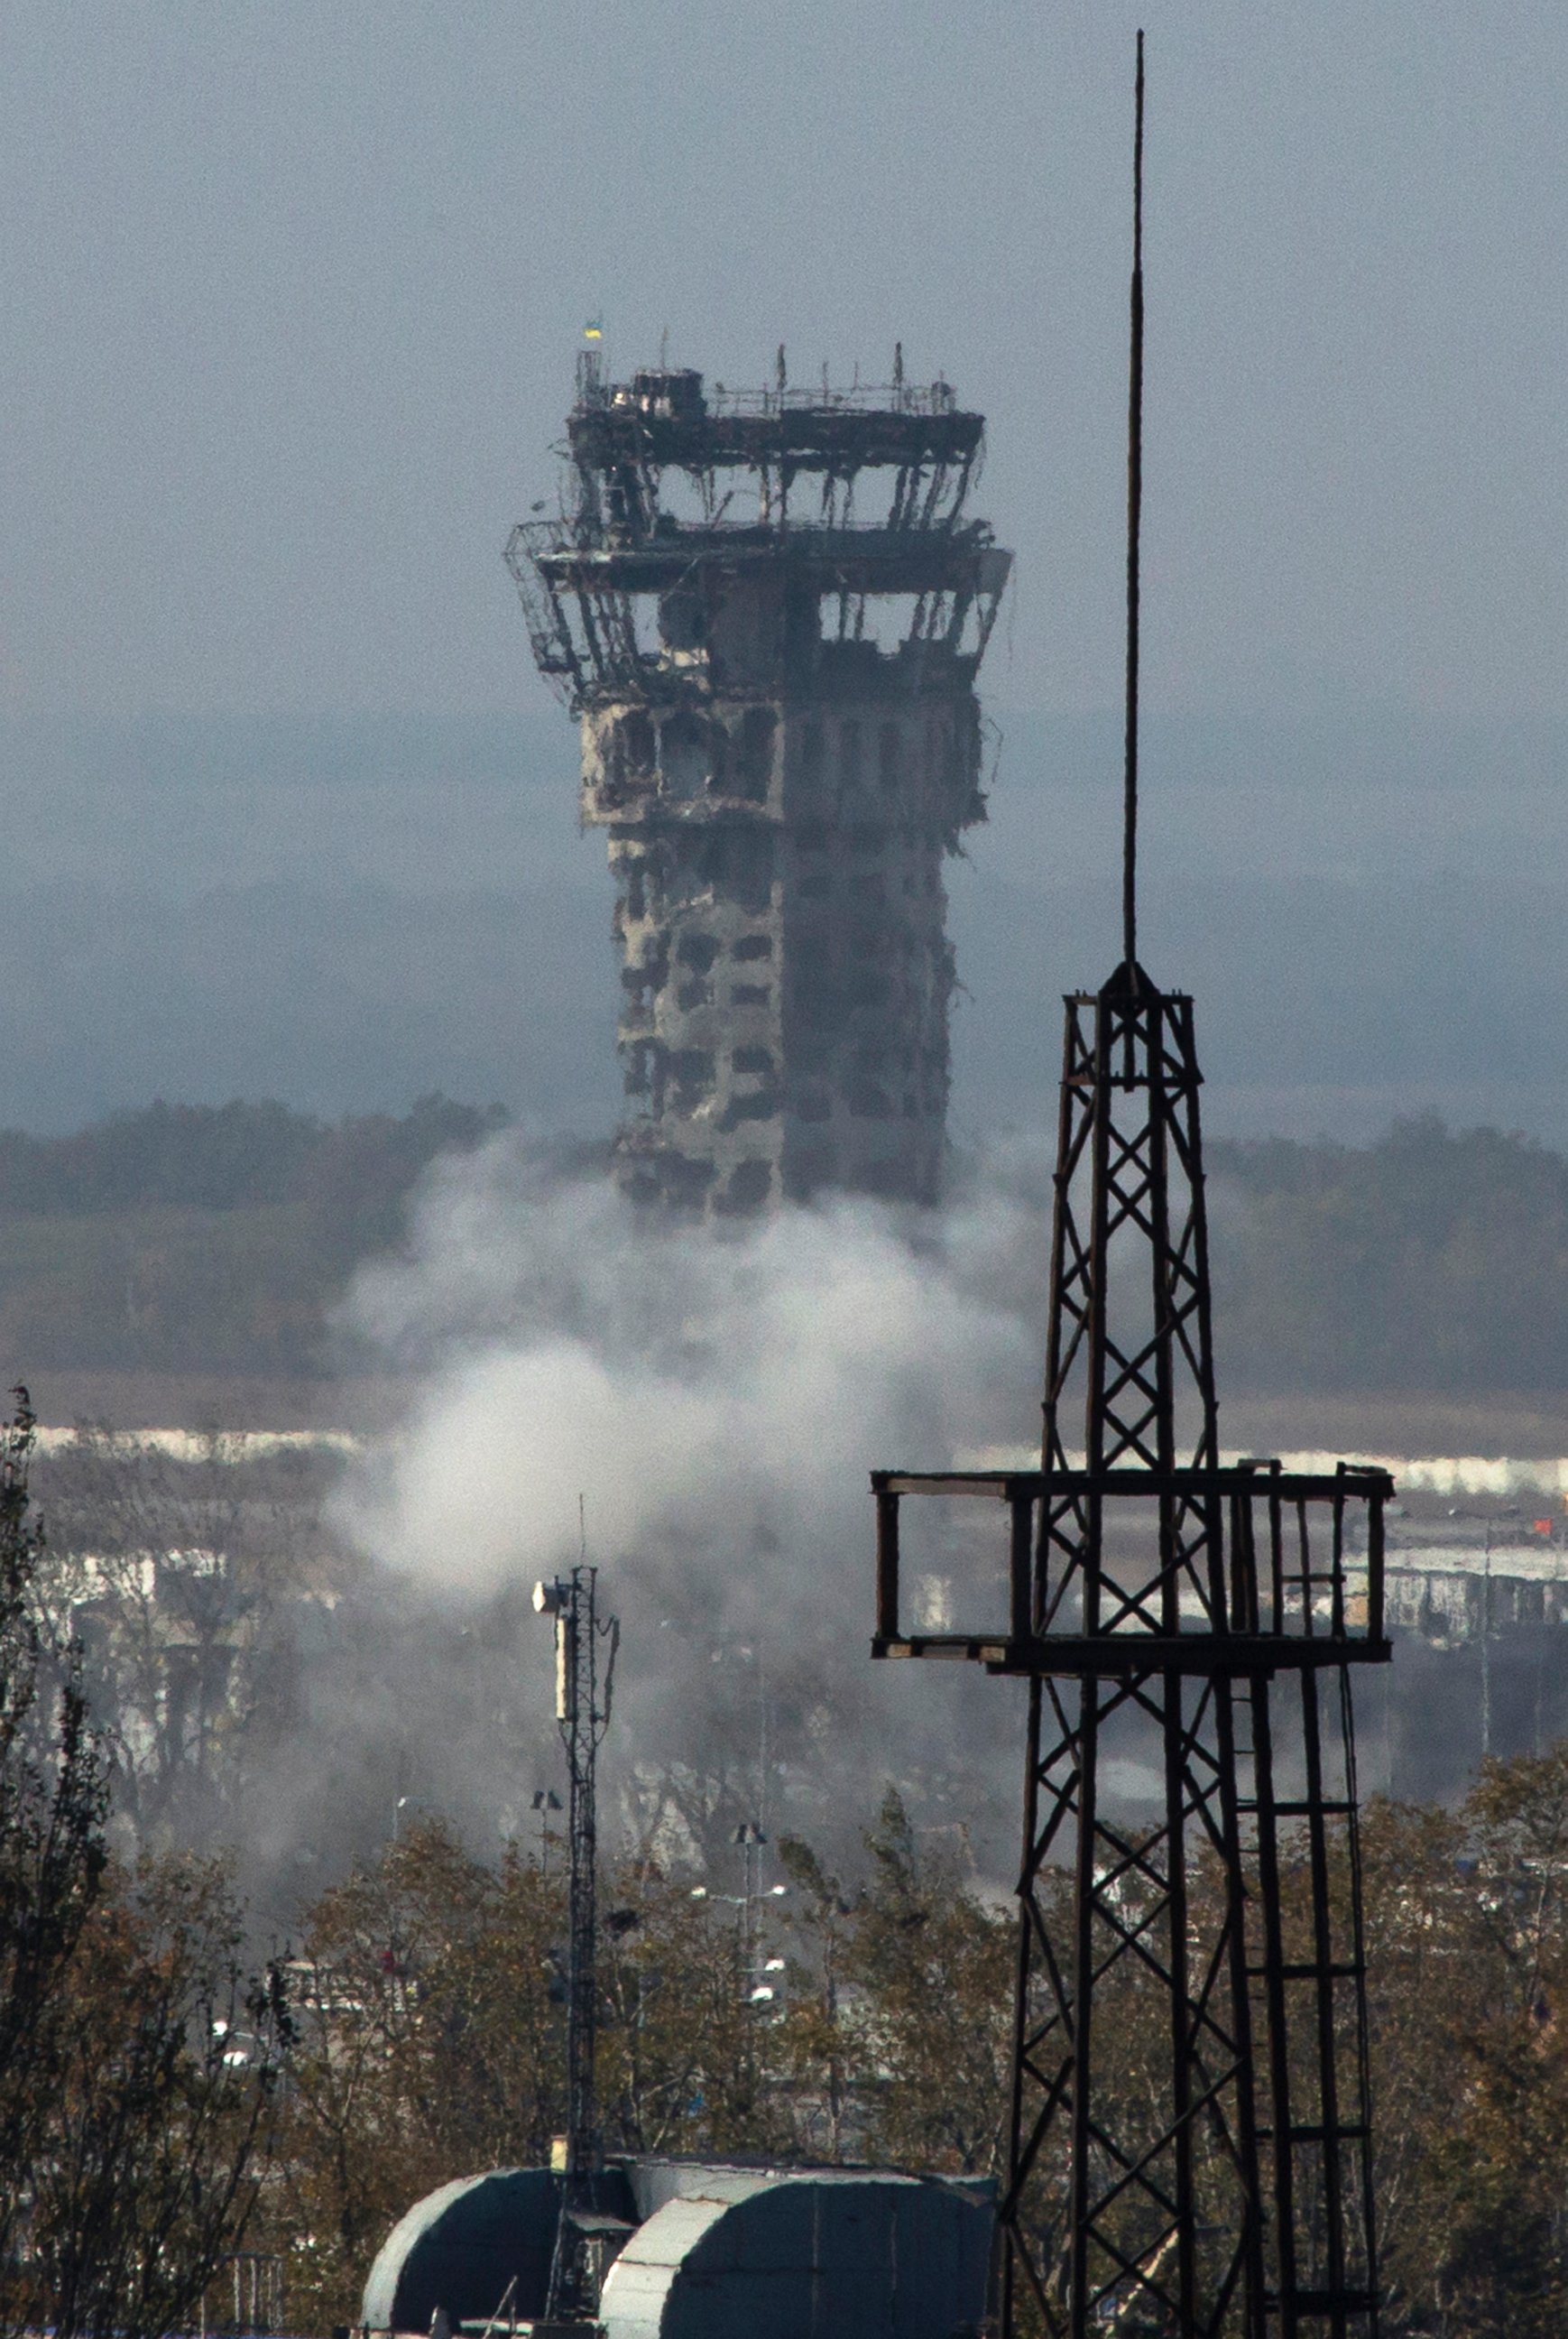 PHOTO: Smoke rises near the traffic control tower of Donetsk Sergey Prokofiev International Airport during artillery battle between pro-Russian rebels and Ukrainian government forces in the town of Donetsk, eastern Ukraine, Oct. 8, 2014. 